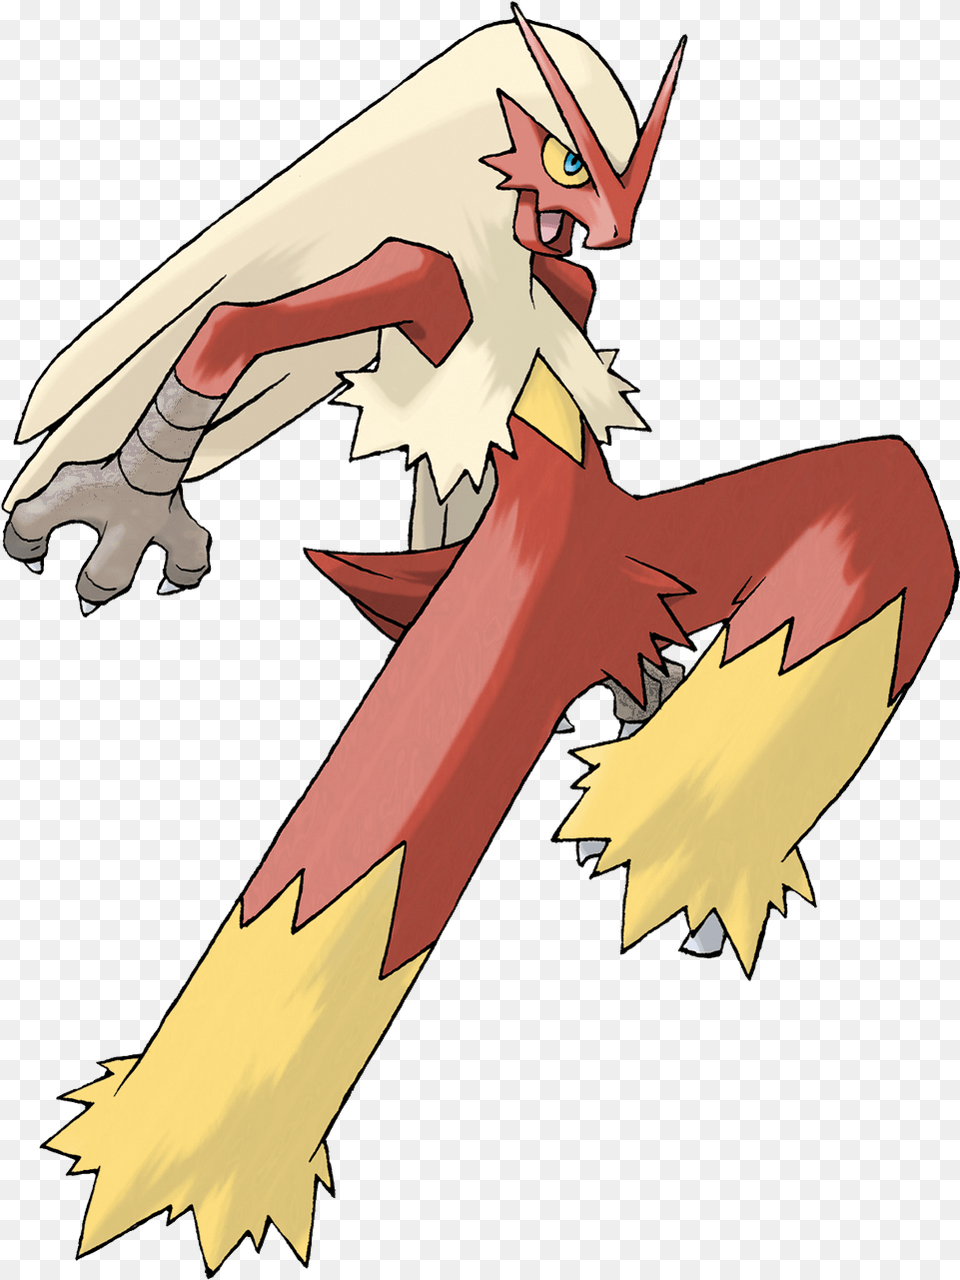 Download Blaziken Image With No Pokemon Blaziken, Adult, Female, Person, Woman Free Transparent Png